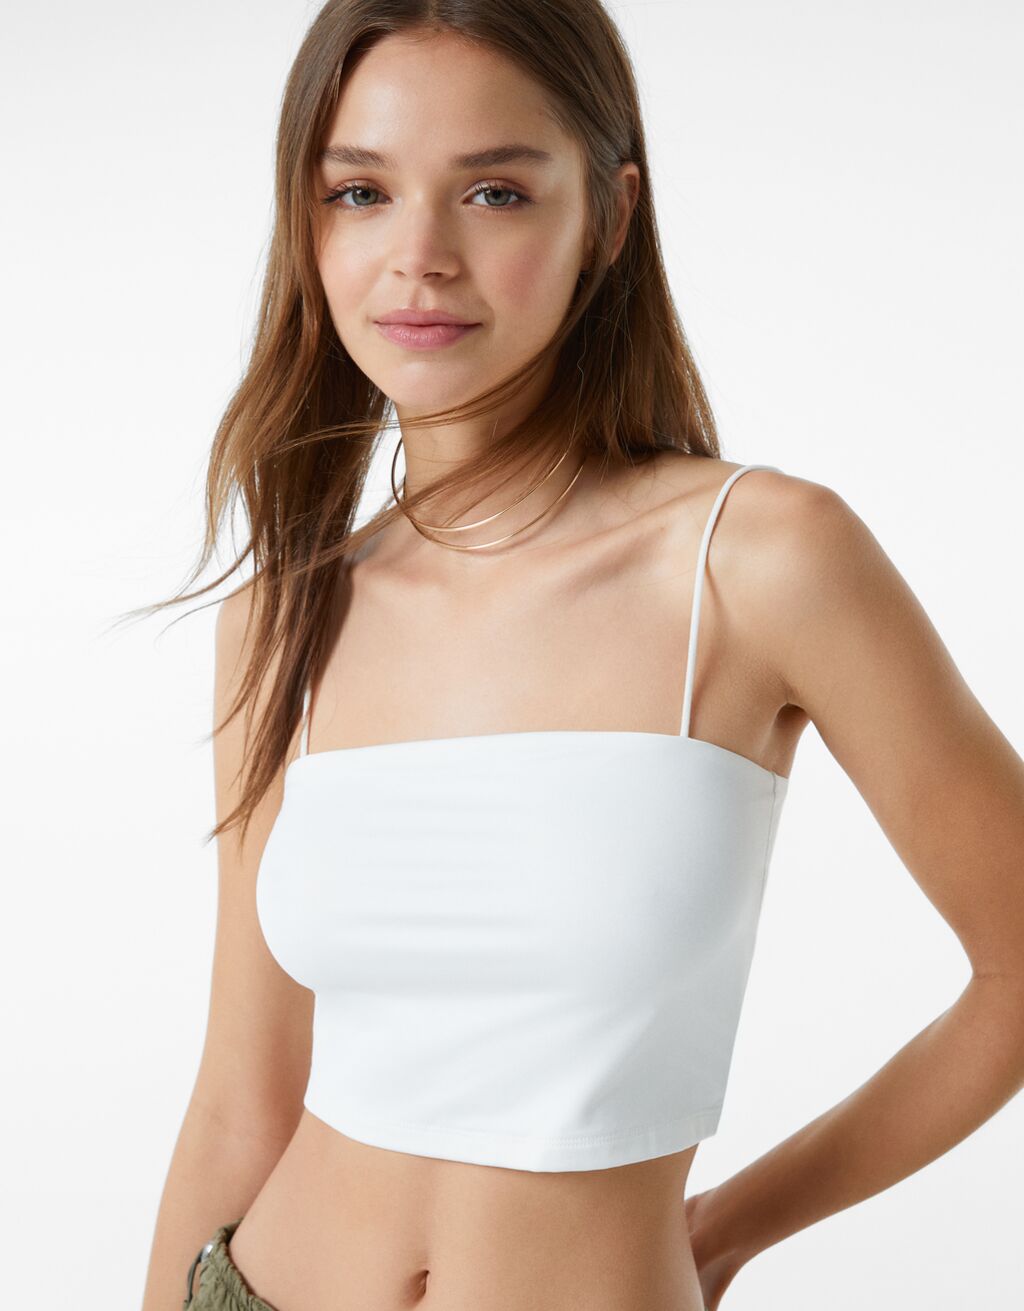 Cropped tank top